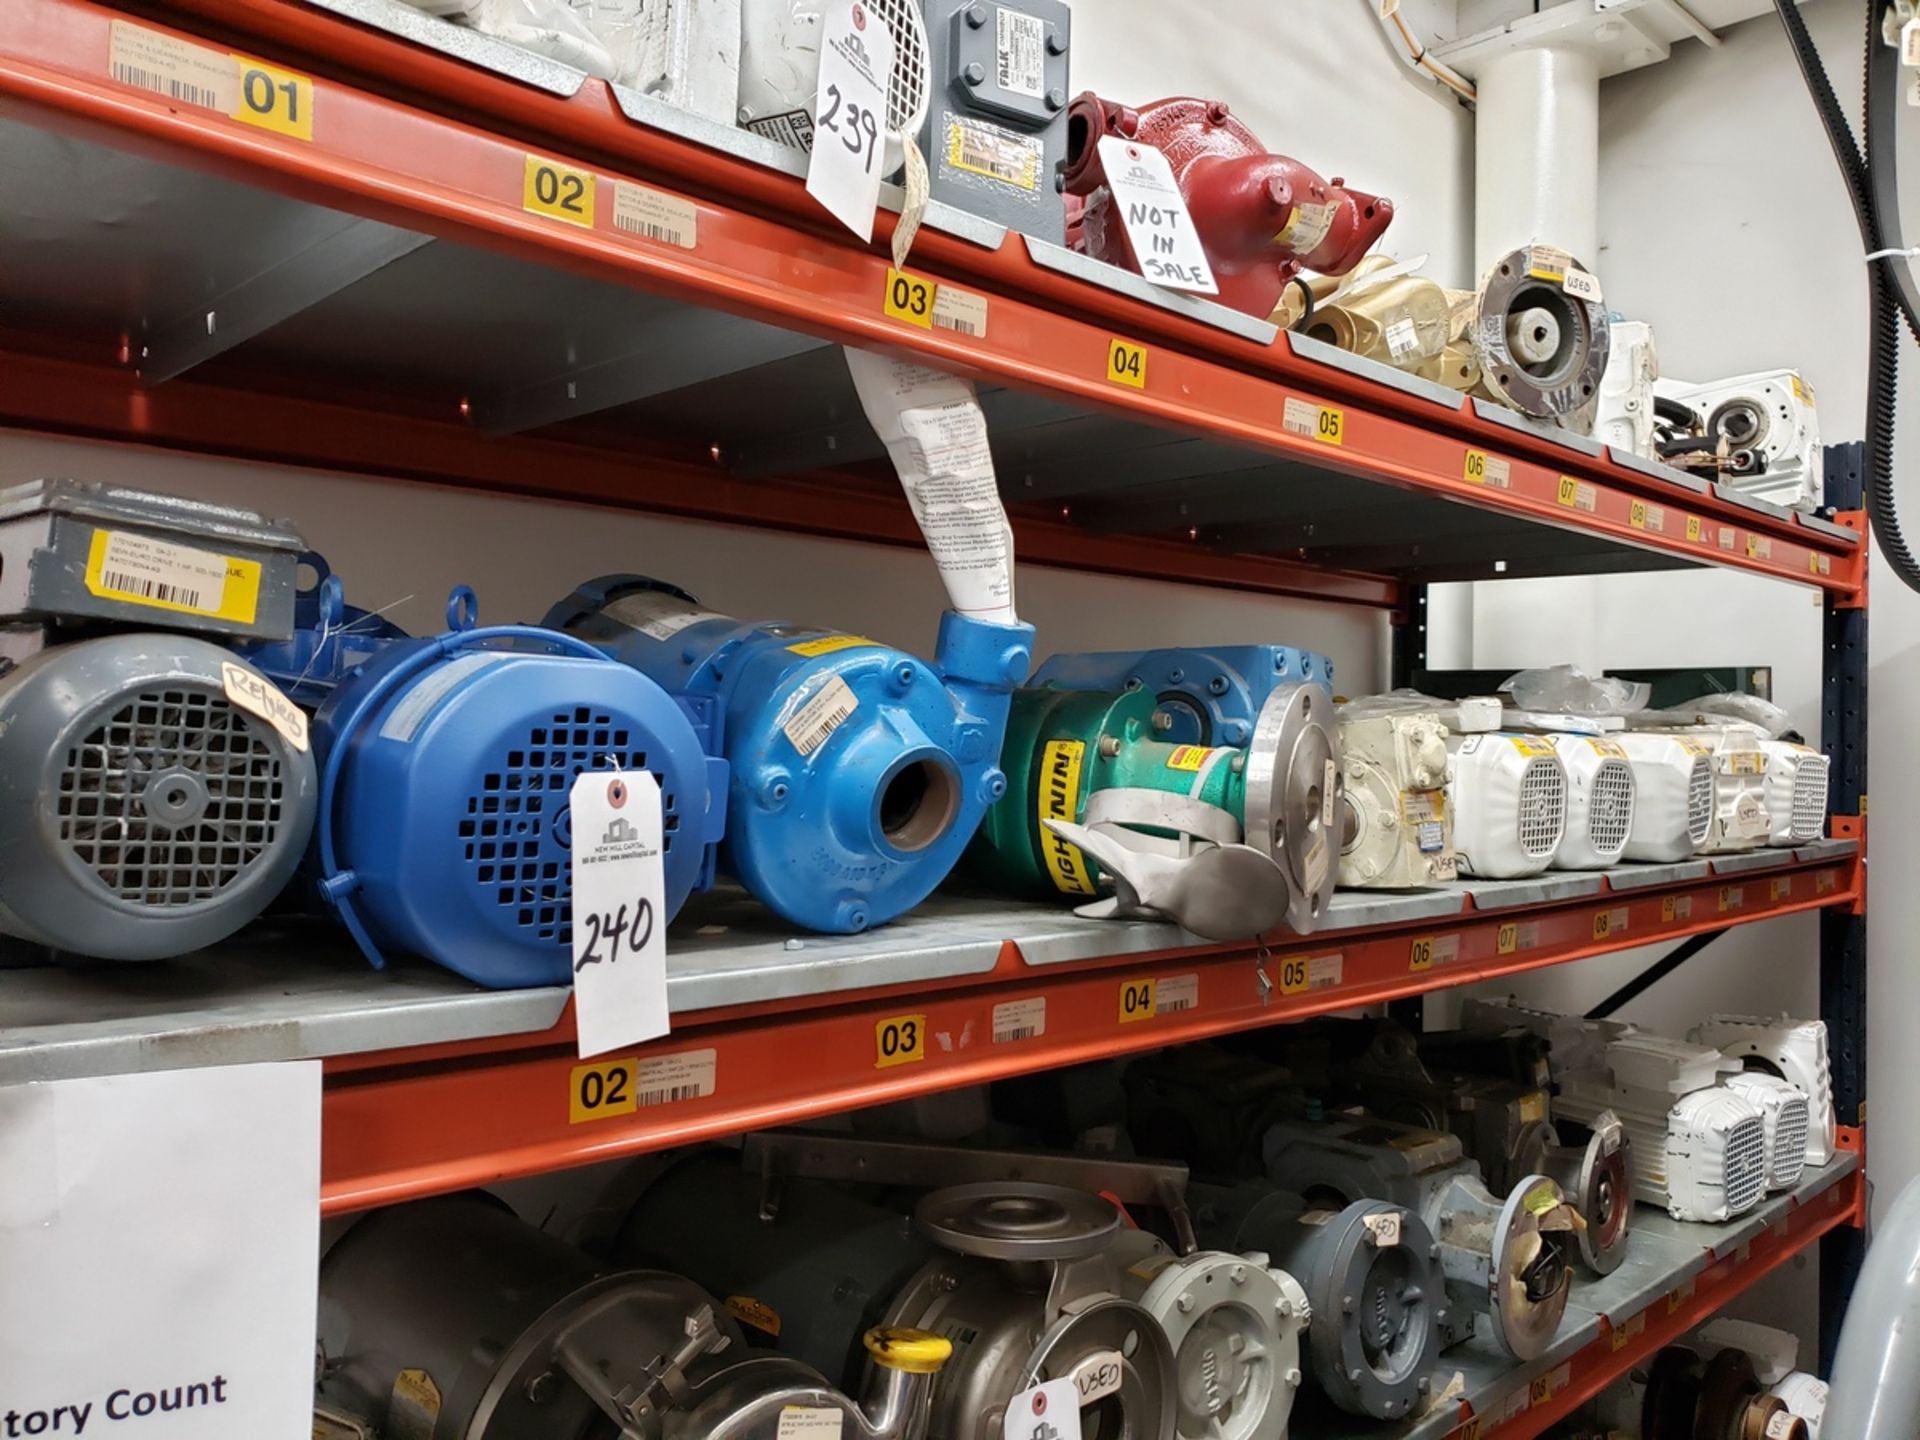 Lot of Pumps, Electric Motors & Gearboxes - Subj to Bulk | Reqd Rig Fee: $100